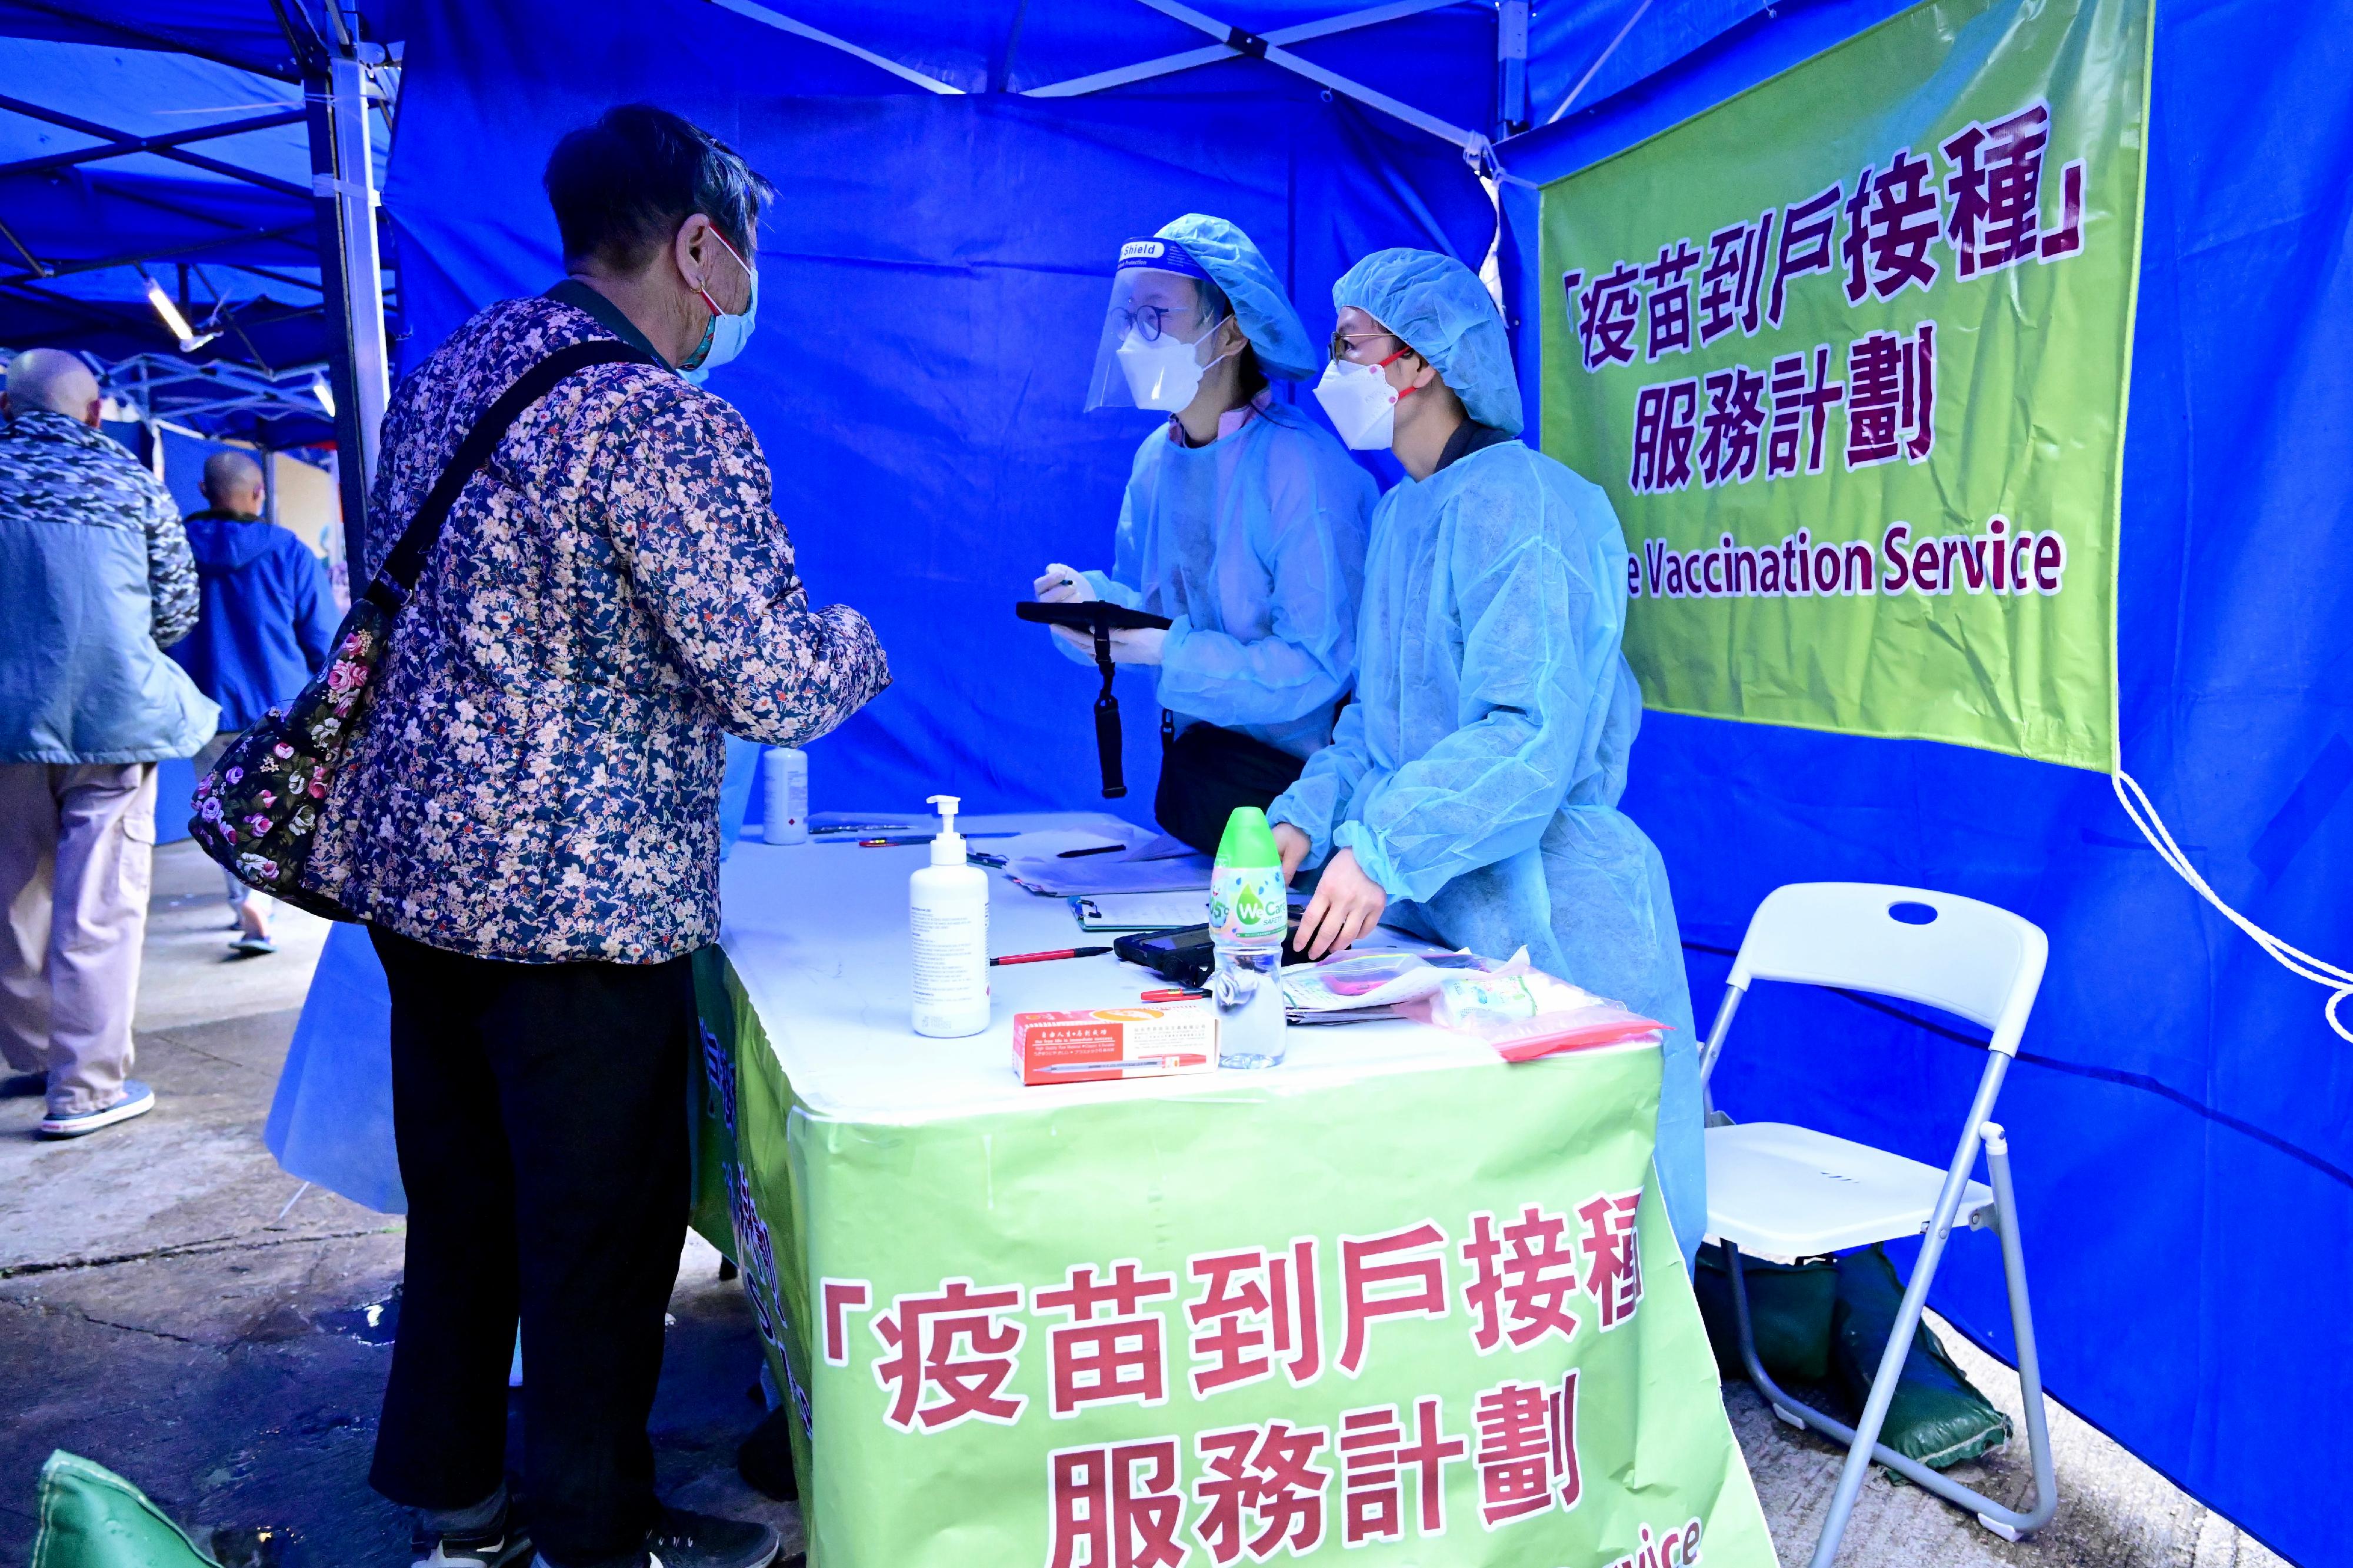 The Civil Service Bureau enforced the "restriction-testing declaration" operation at Hong Wing House, Cheung Hong Estate in Tsing Yi from this afternoon (April 2). An information counter of the Home Vaccination Service is set up to collect registration information of unvaccinated elderly persons aged 70 or above and of persons who are unable to leave their homes for vaccination due to illness or physical disability for arranging door-to-door vaccination for them.